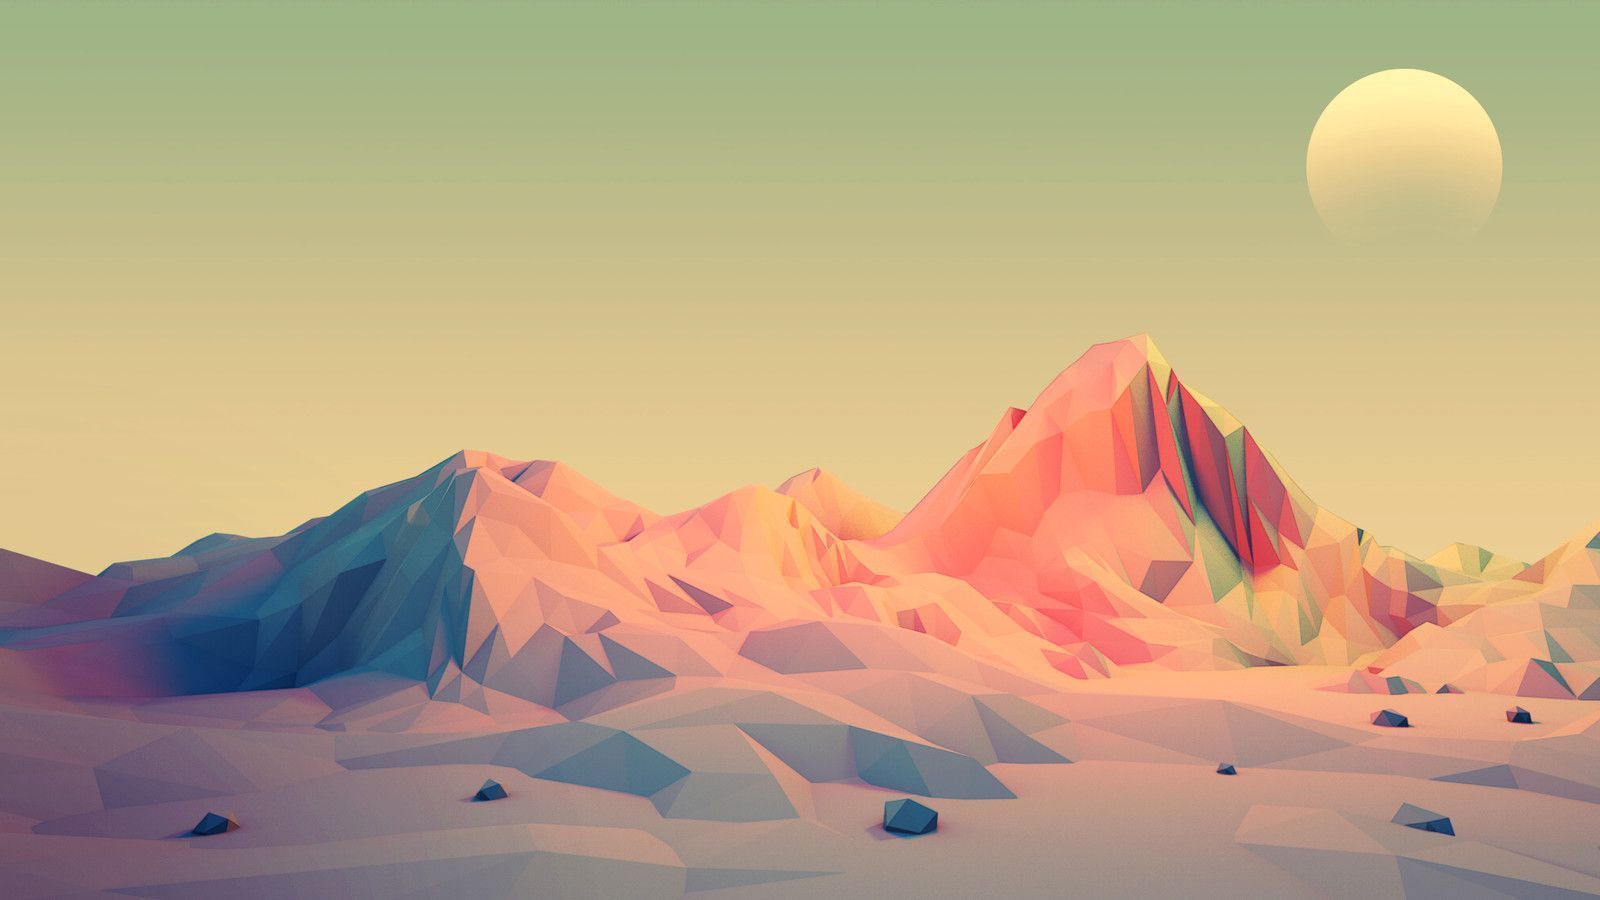 A low poly illustration of a desert with a mountain range and a full moon - Low poly